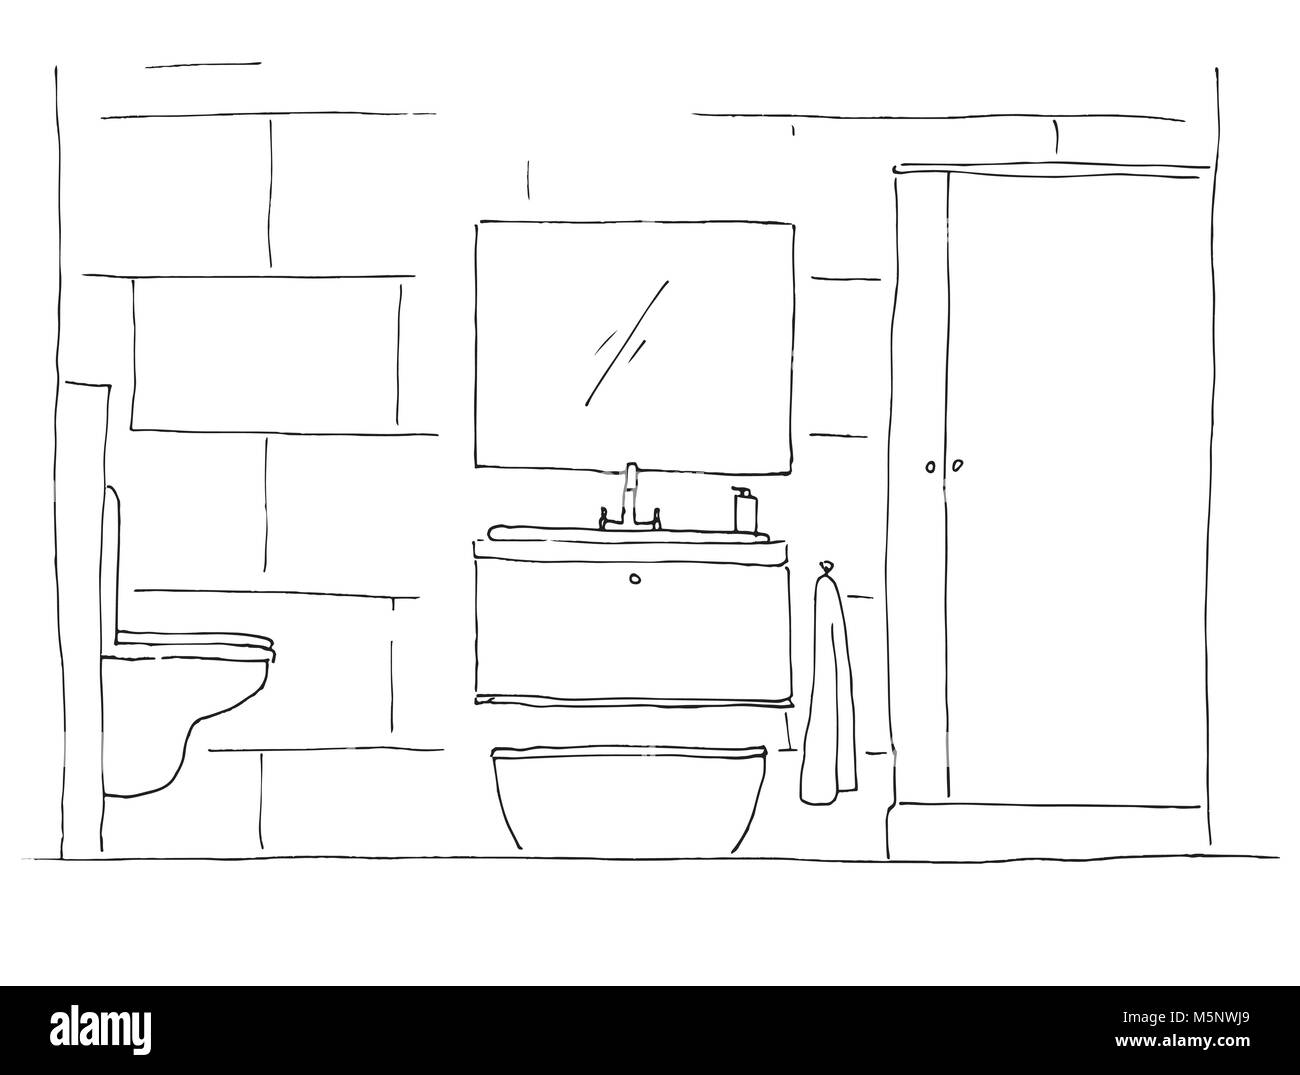 Hand drawn sketch. Linear sketch of an interior. Part of the bathroom. Vector illustration Stock Vector